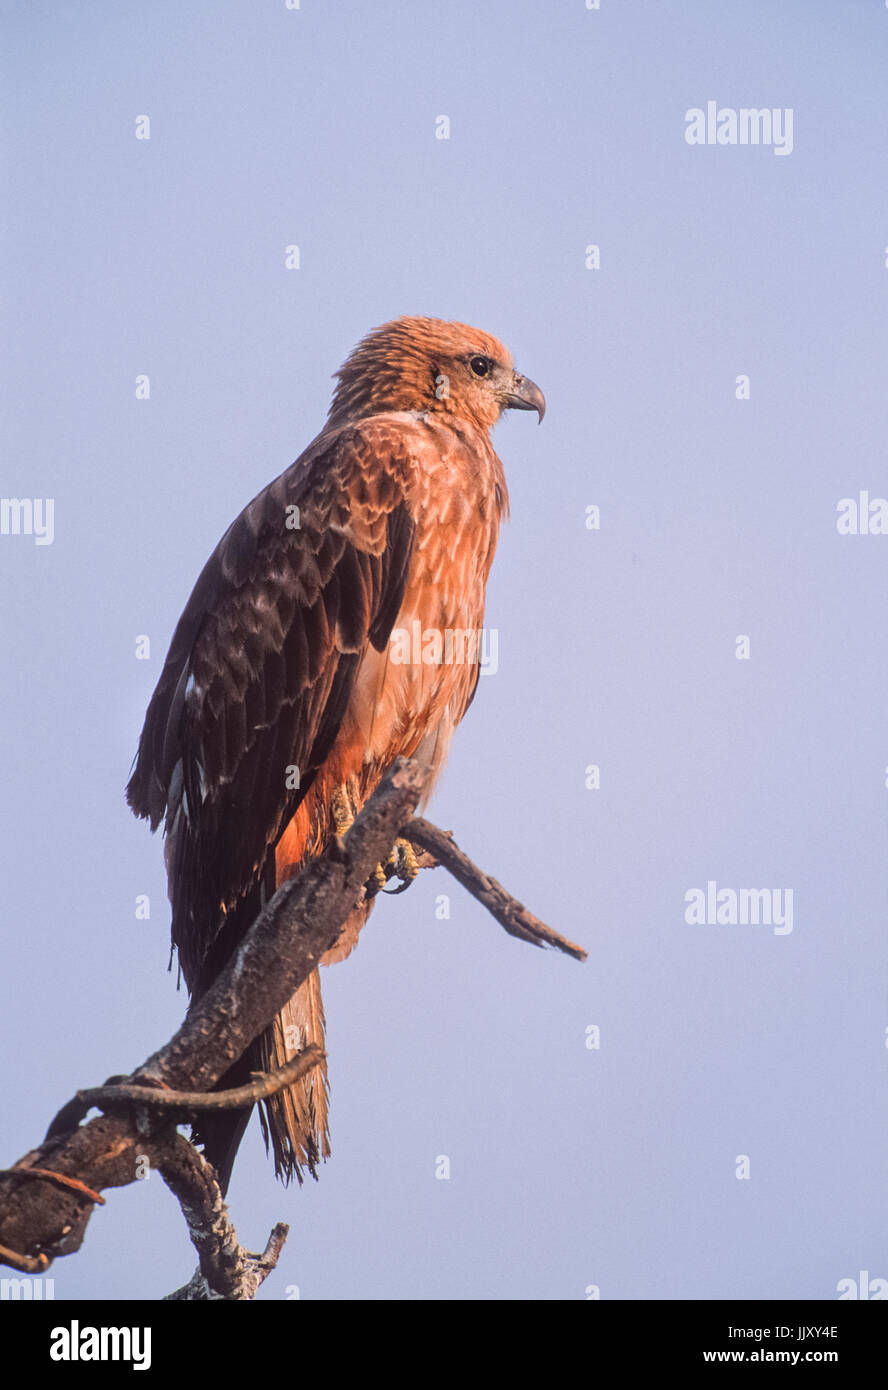 Indian Spotted Eagle, (Clanga hastata), perched on tree, Keoladeo Ghana National Park, Bharatpur, Rajasthan, India Stock Photo